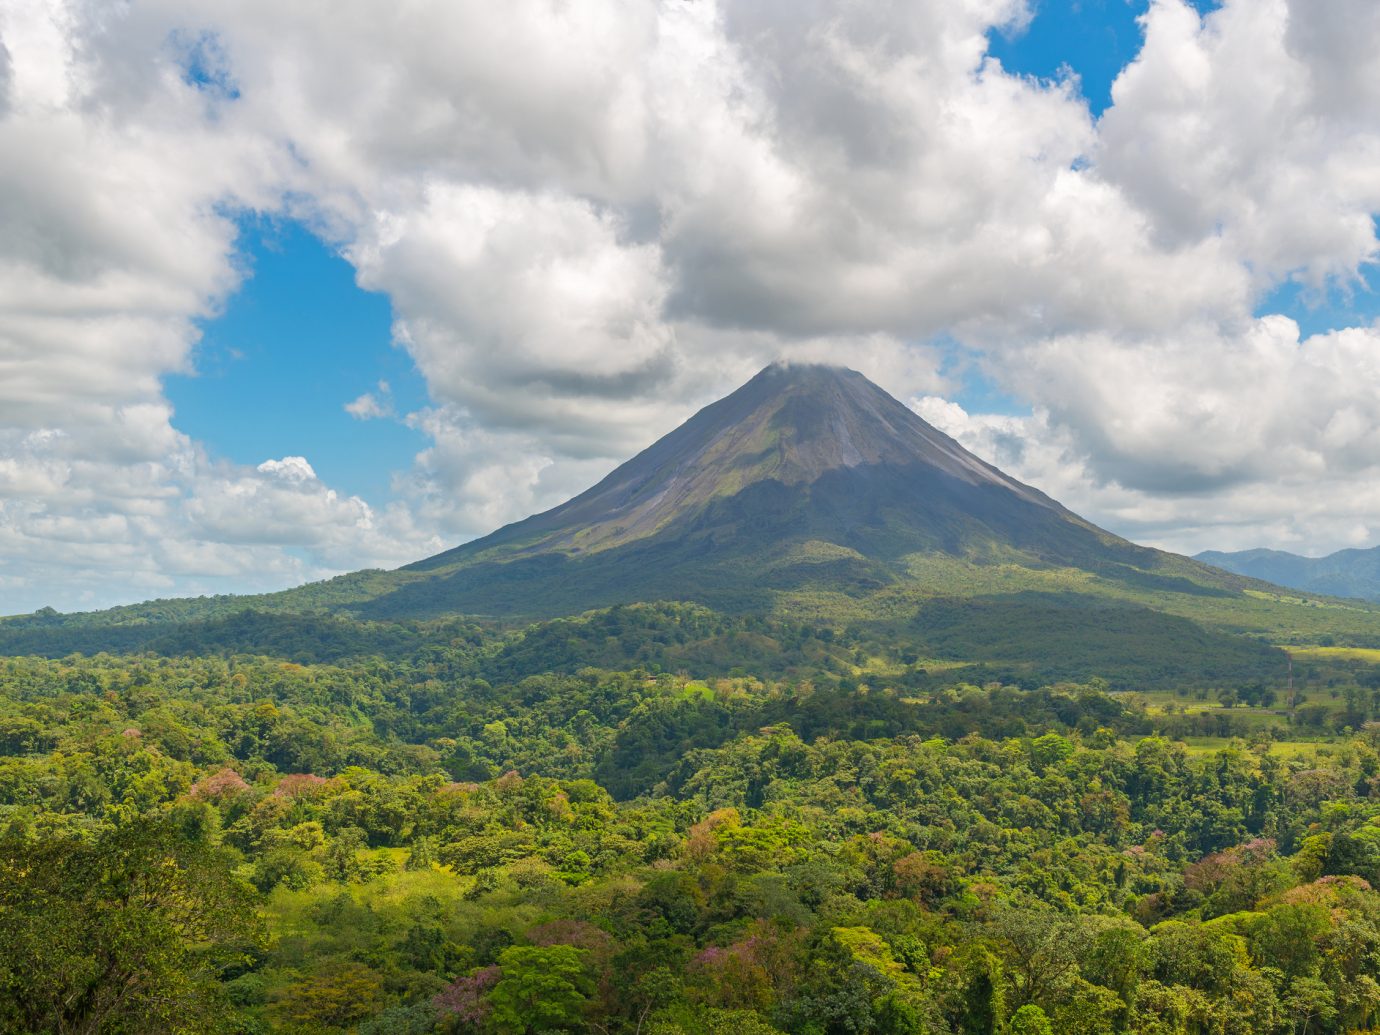 Landscape of the Arenal volcano surrounded by tropical rainforest on a sunny summer day near the cities of La Fortuna and San Jose, Costa Rica, Central America.